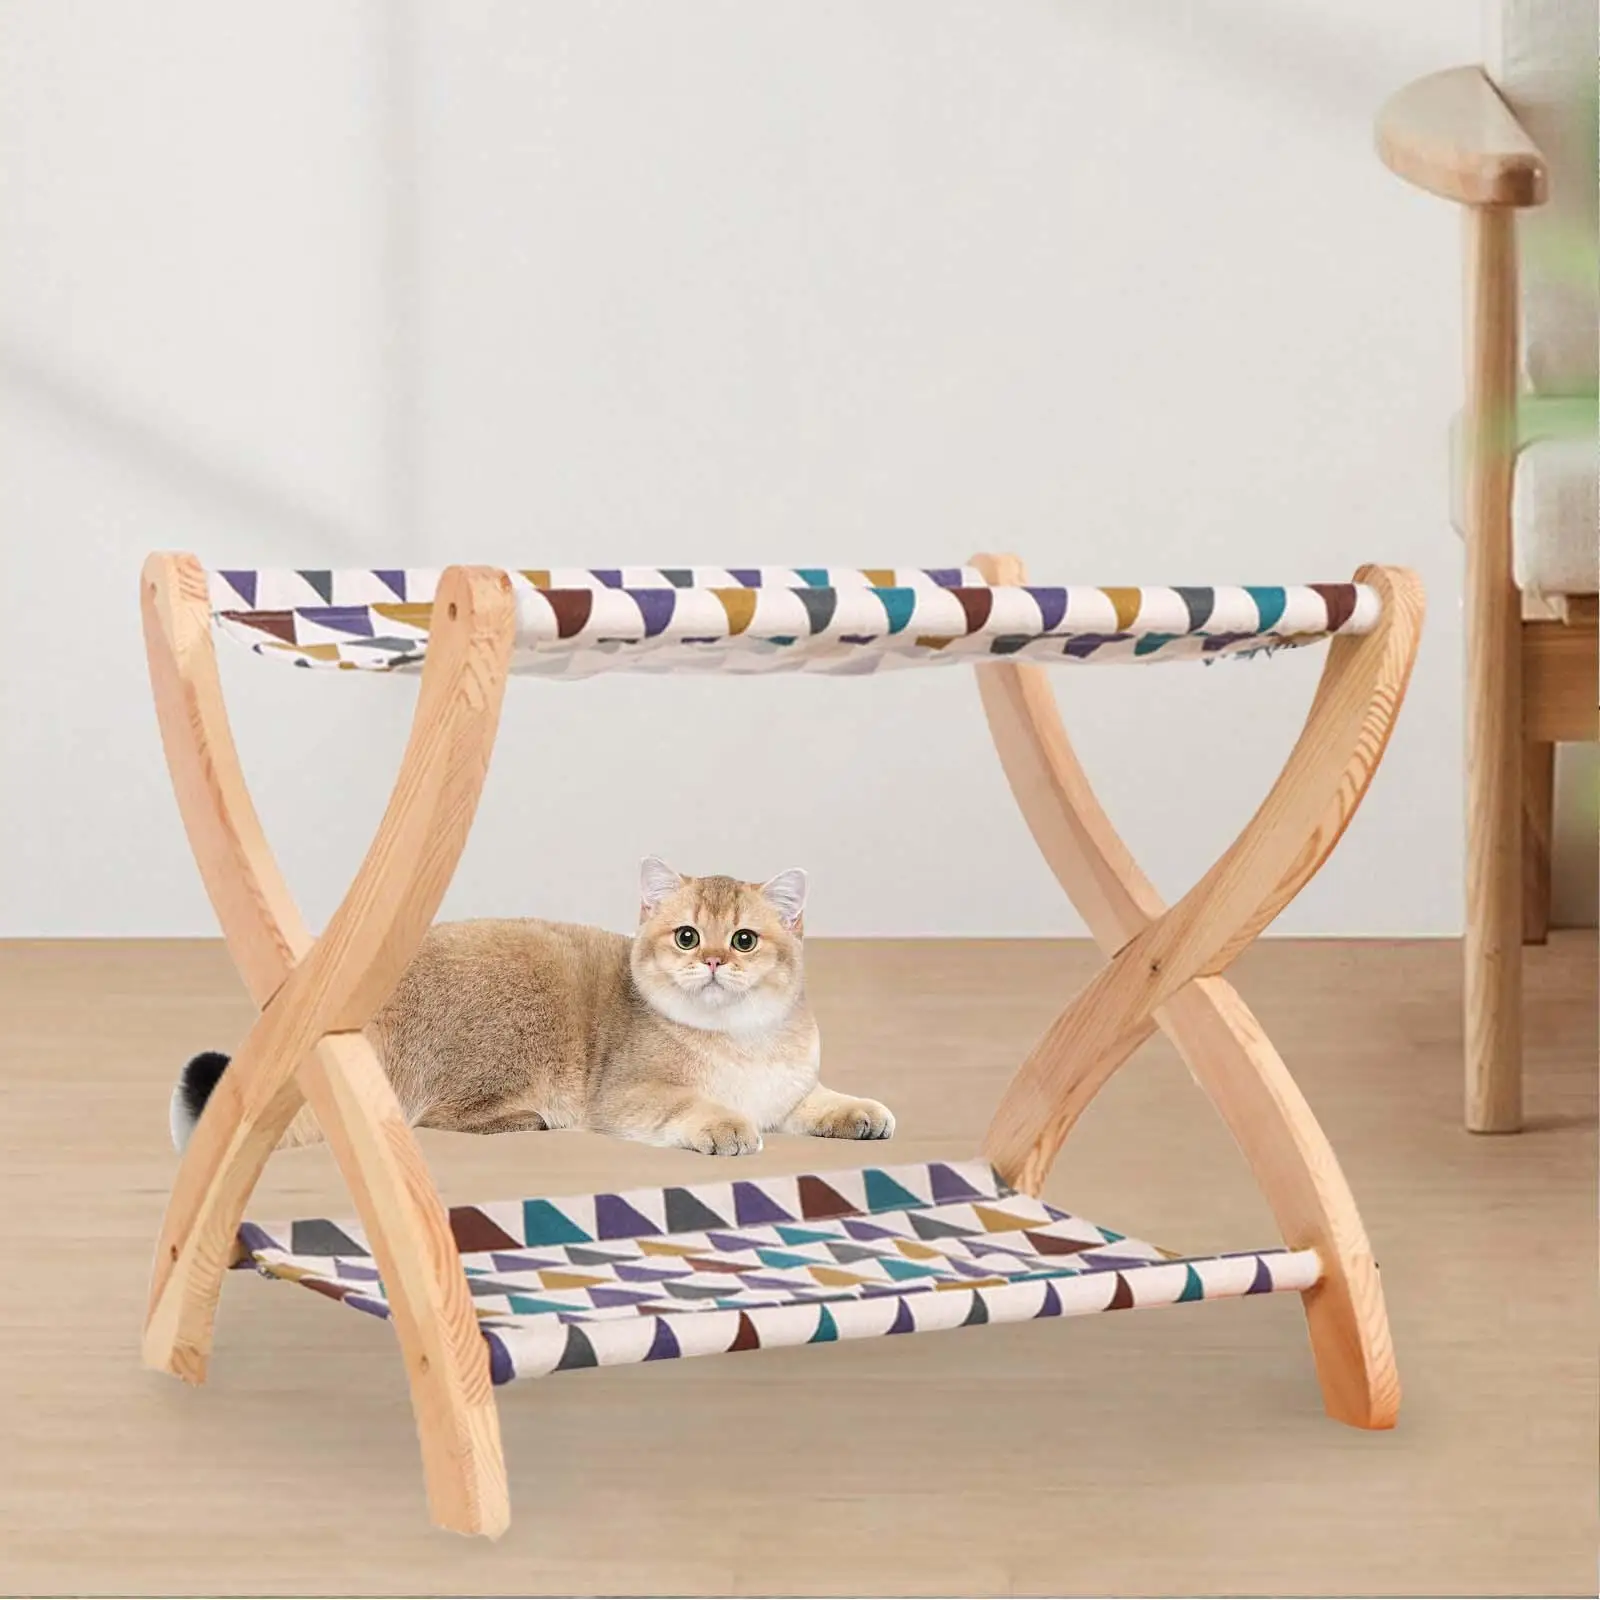 Double Layer Cat Lounge Beds Raised Pet Beds Floor Standing Kitty Bunny Kitten Wood Lounger Small Animals Climbing Cat Furniture